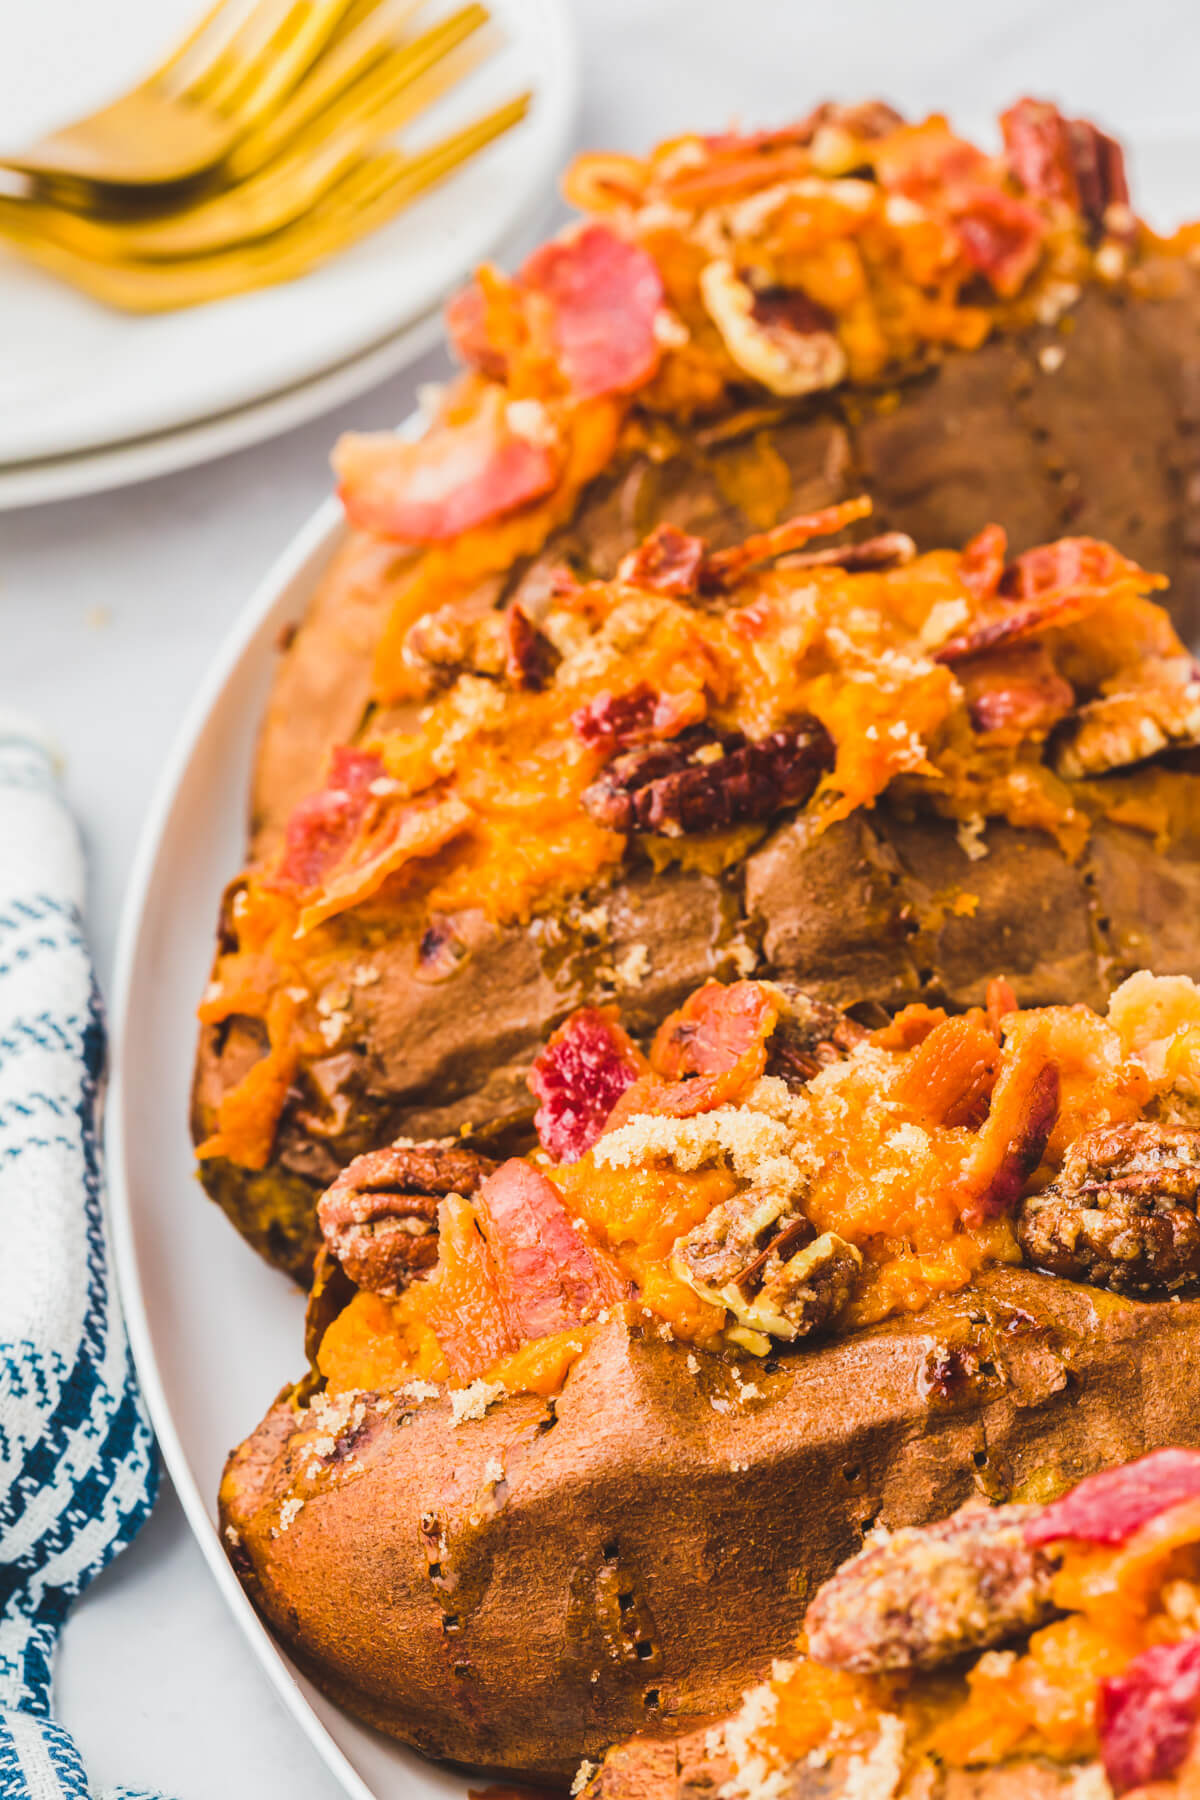 Four Twice Baked Sweet Potatoes topped with crispy bacon and pecans on a white plate.